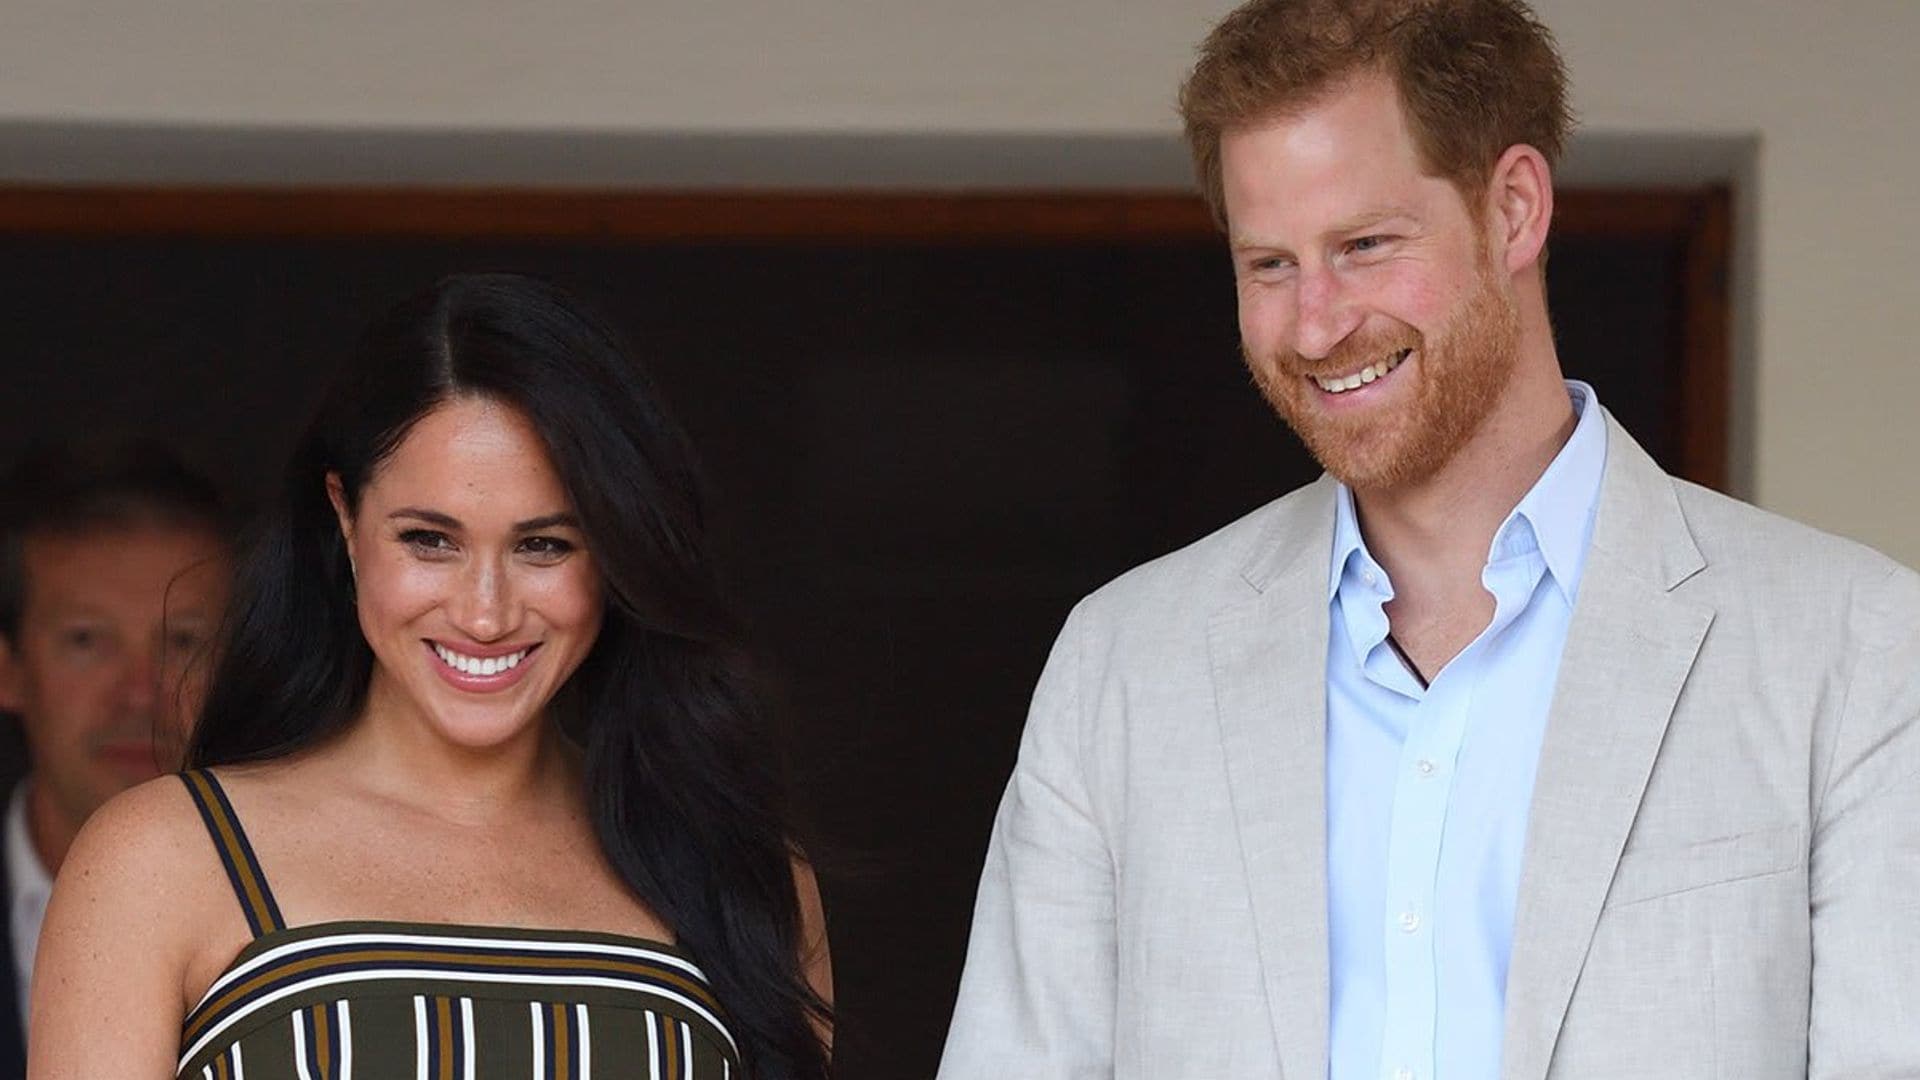 She's here! Meghan Markle and Prince Harry welcome their baby girl